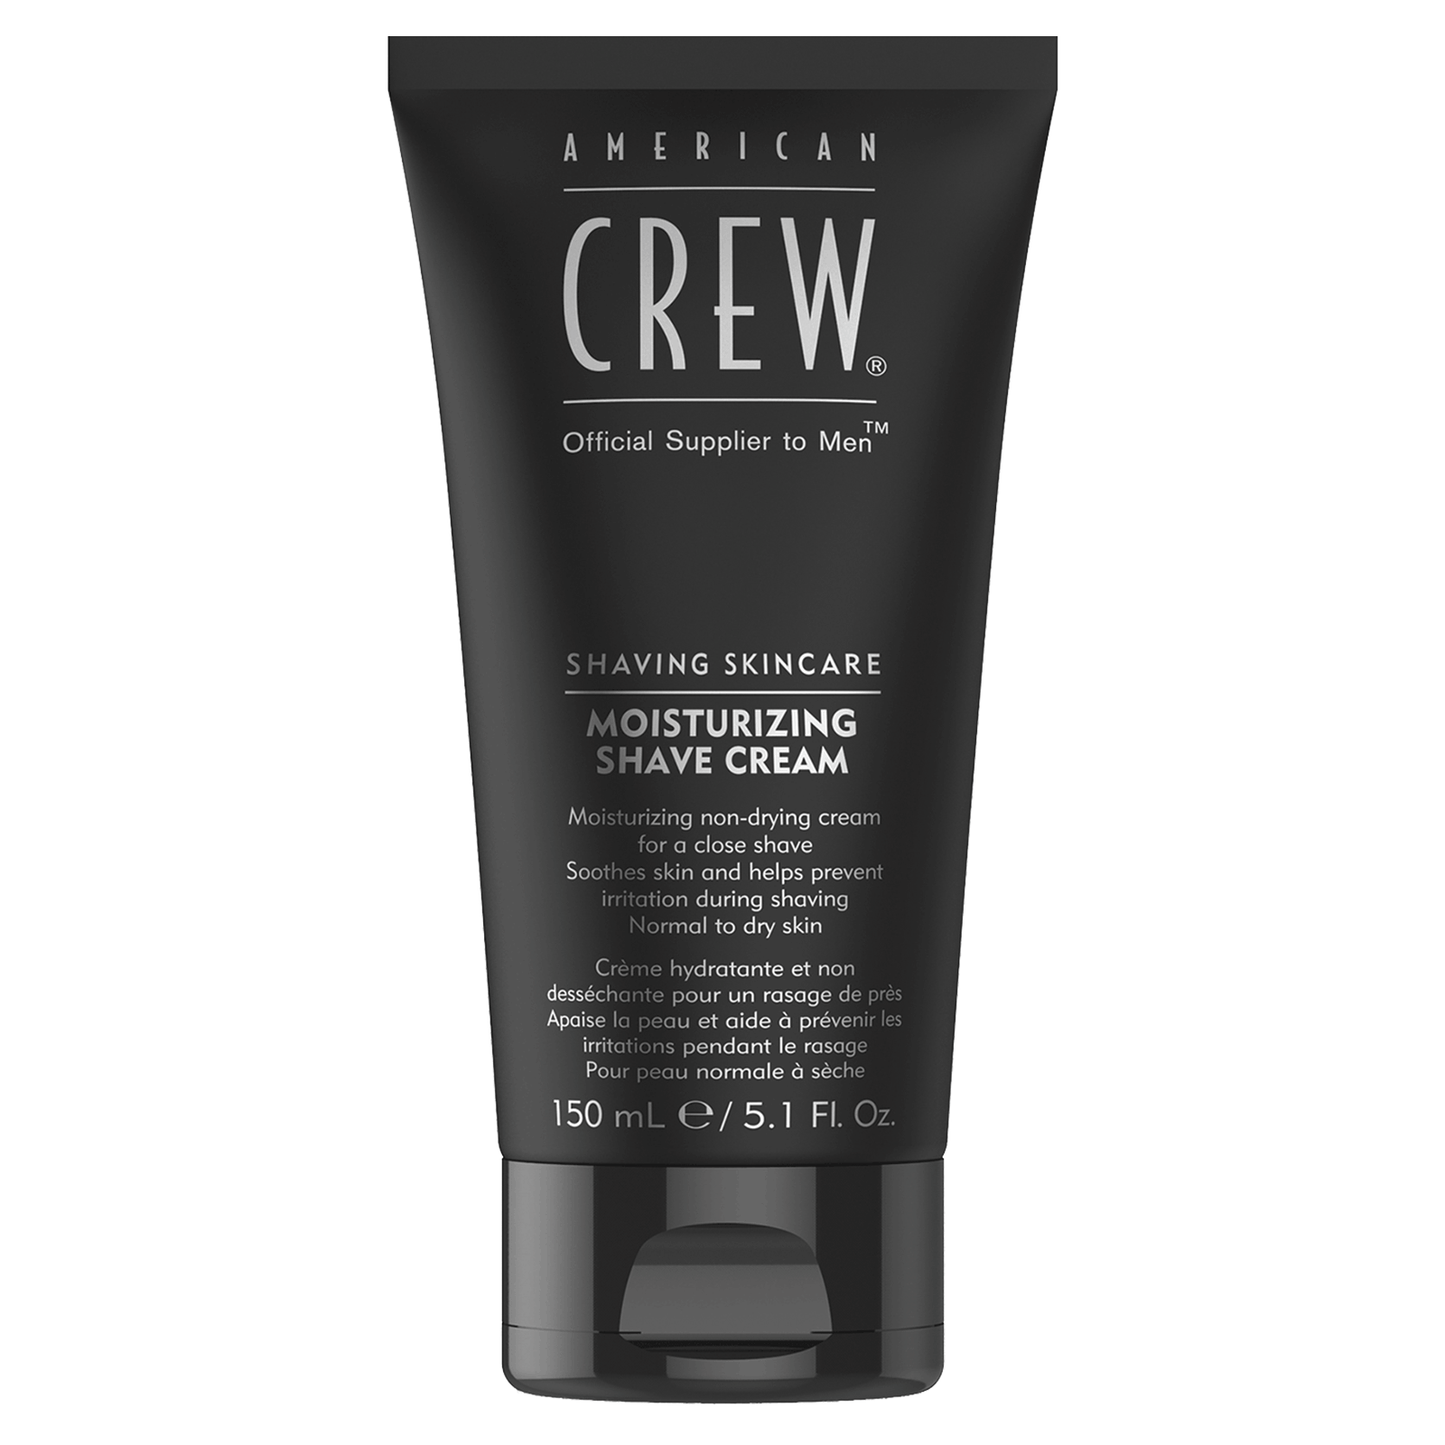 Moisturizing non-drying cream for a close shave. Non-foaming cream creates a protective barrier on your skin ensuring the razor glide without drying the skin. Emollients provide maximum protection and conditioning for skin that requires extra moisture. Helpful for men who wish to see the exact areas that have been shaved